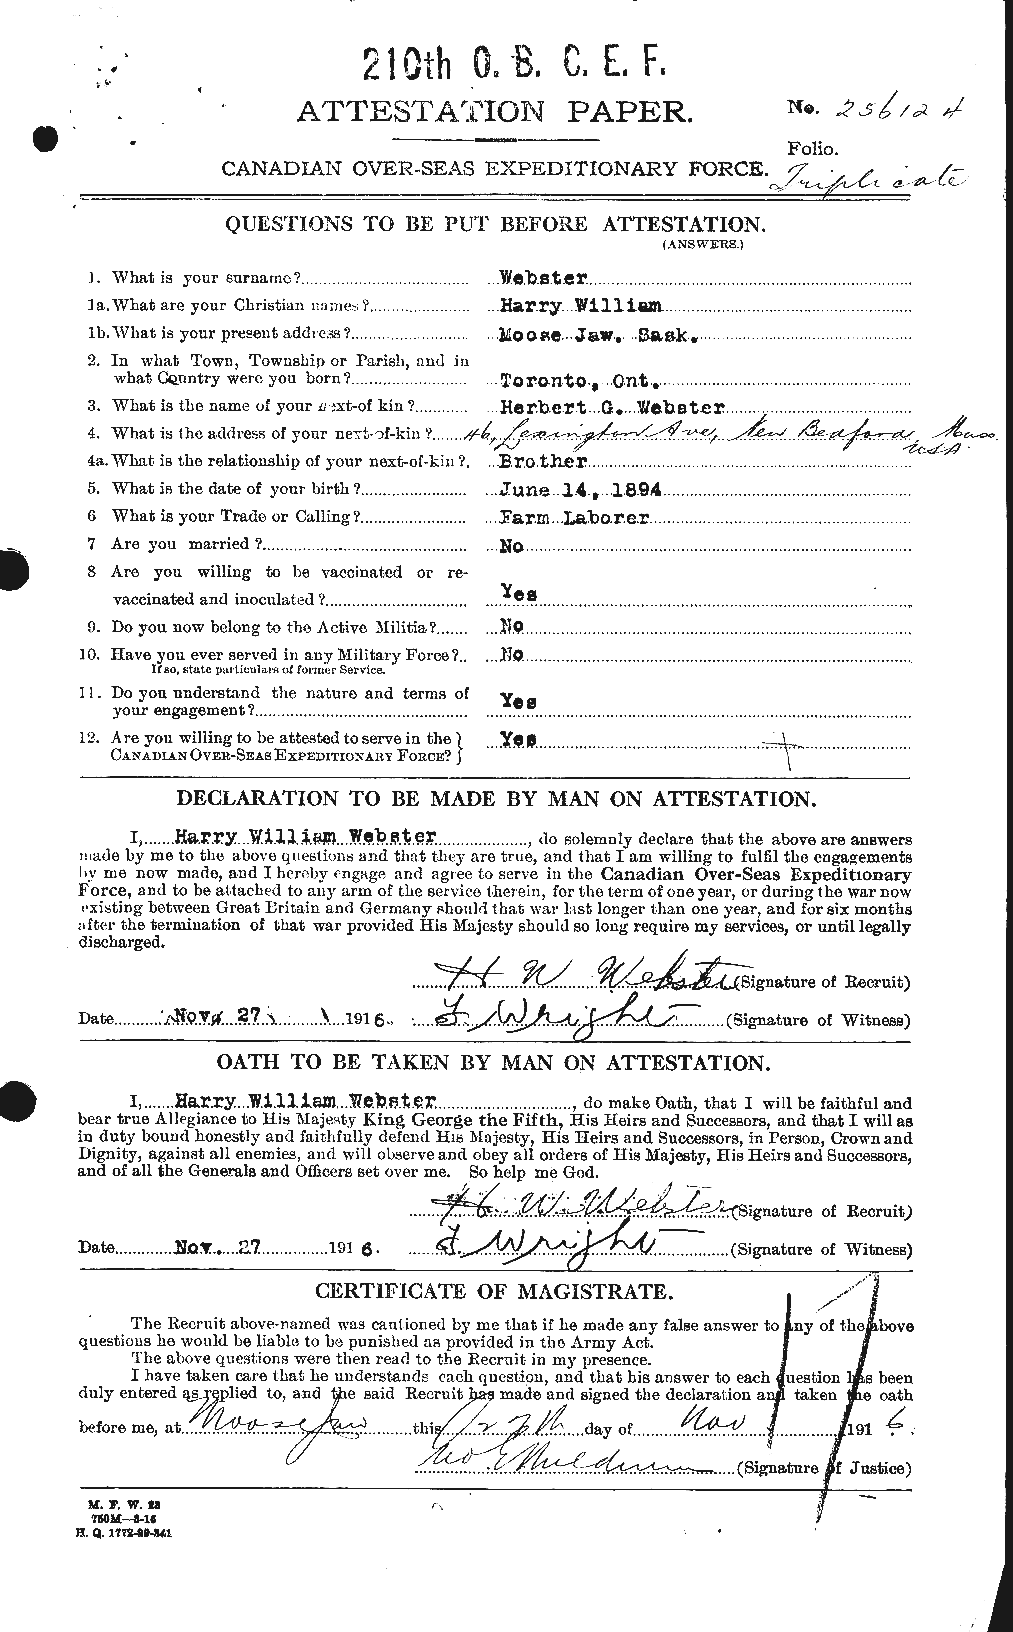 Personnel Records of the First World War - CEF 670425a